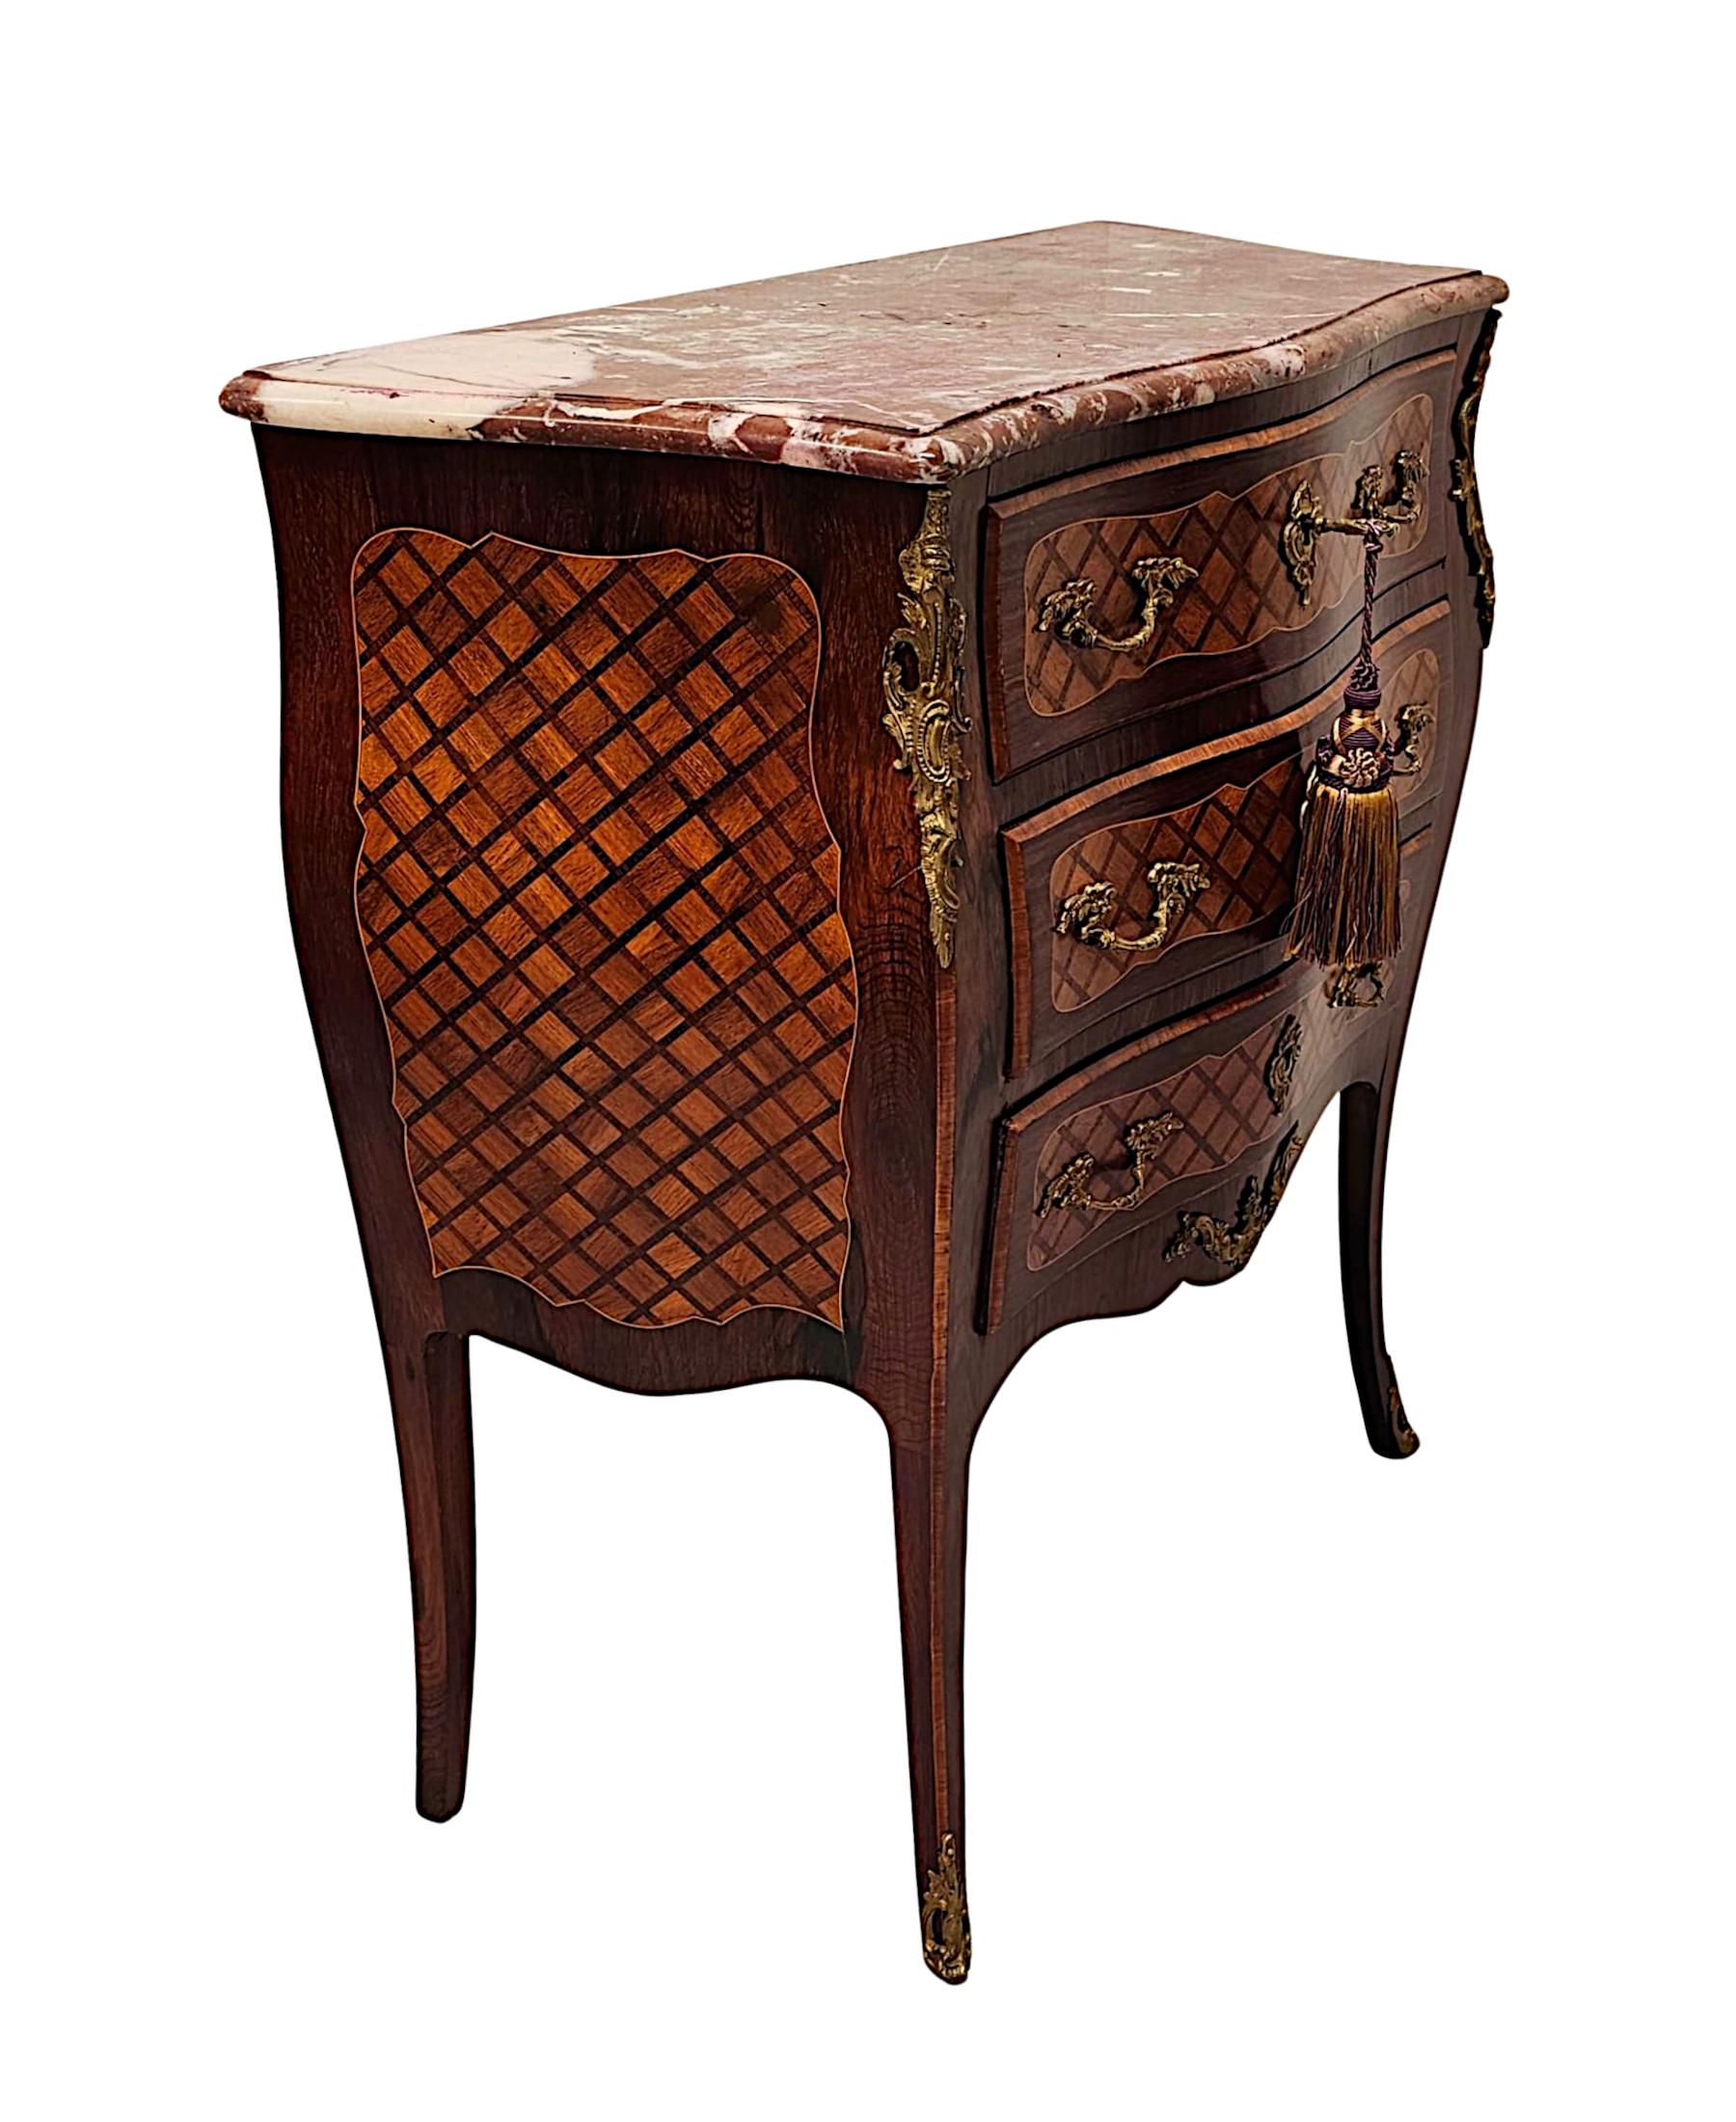 French A Very Rare 19th Century Marble Top Inlaid Ormolu Mounted Chest of Drawers For Sale